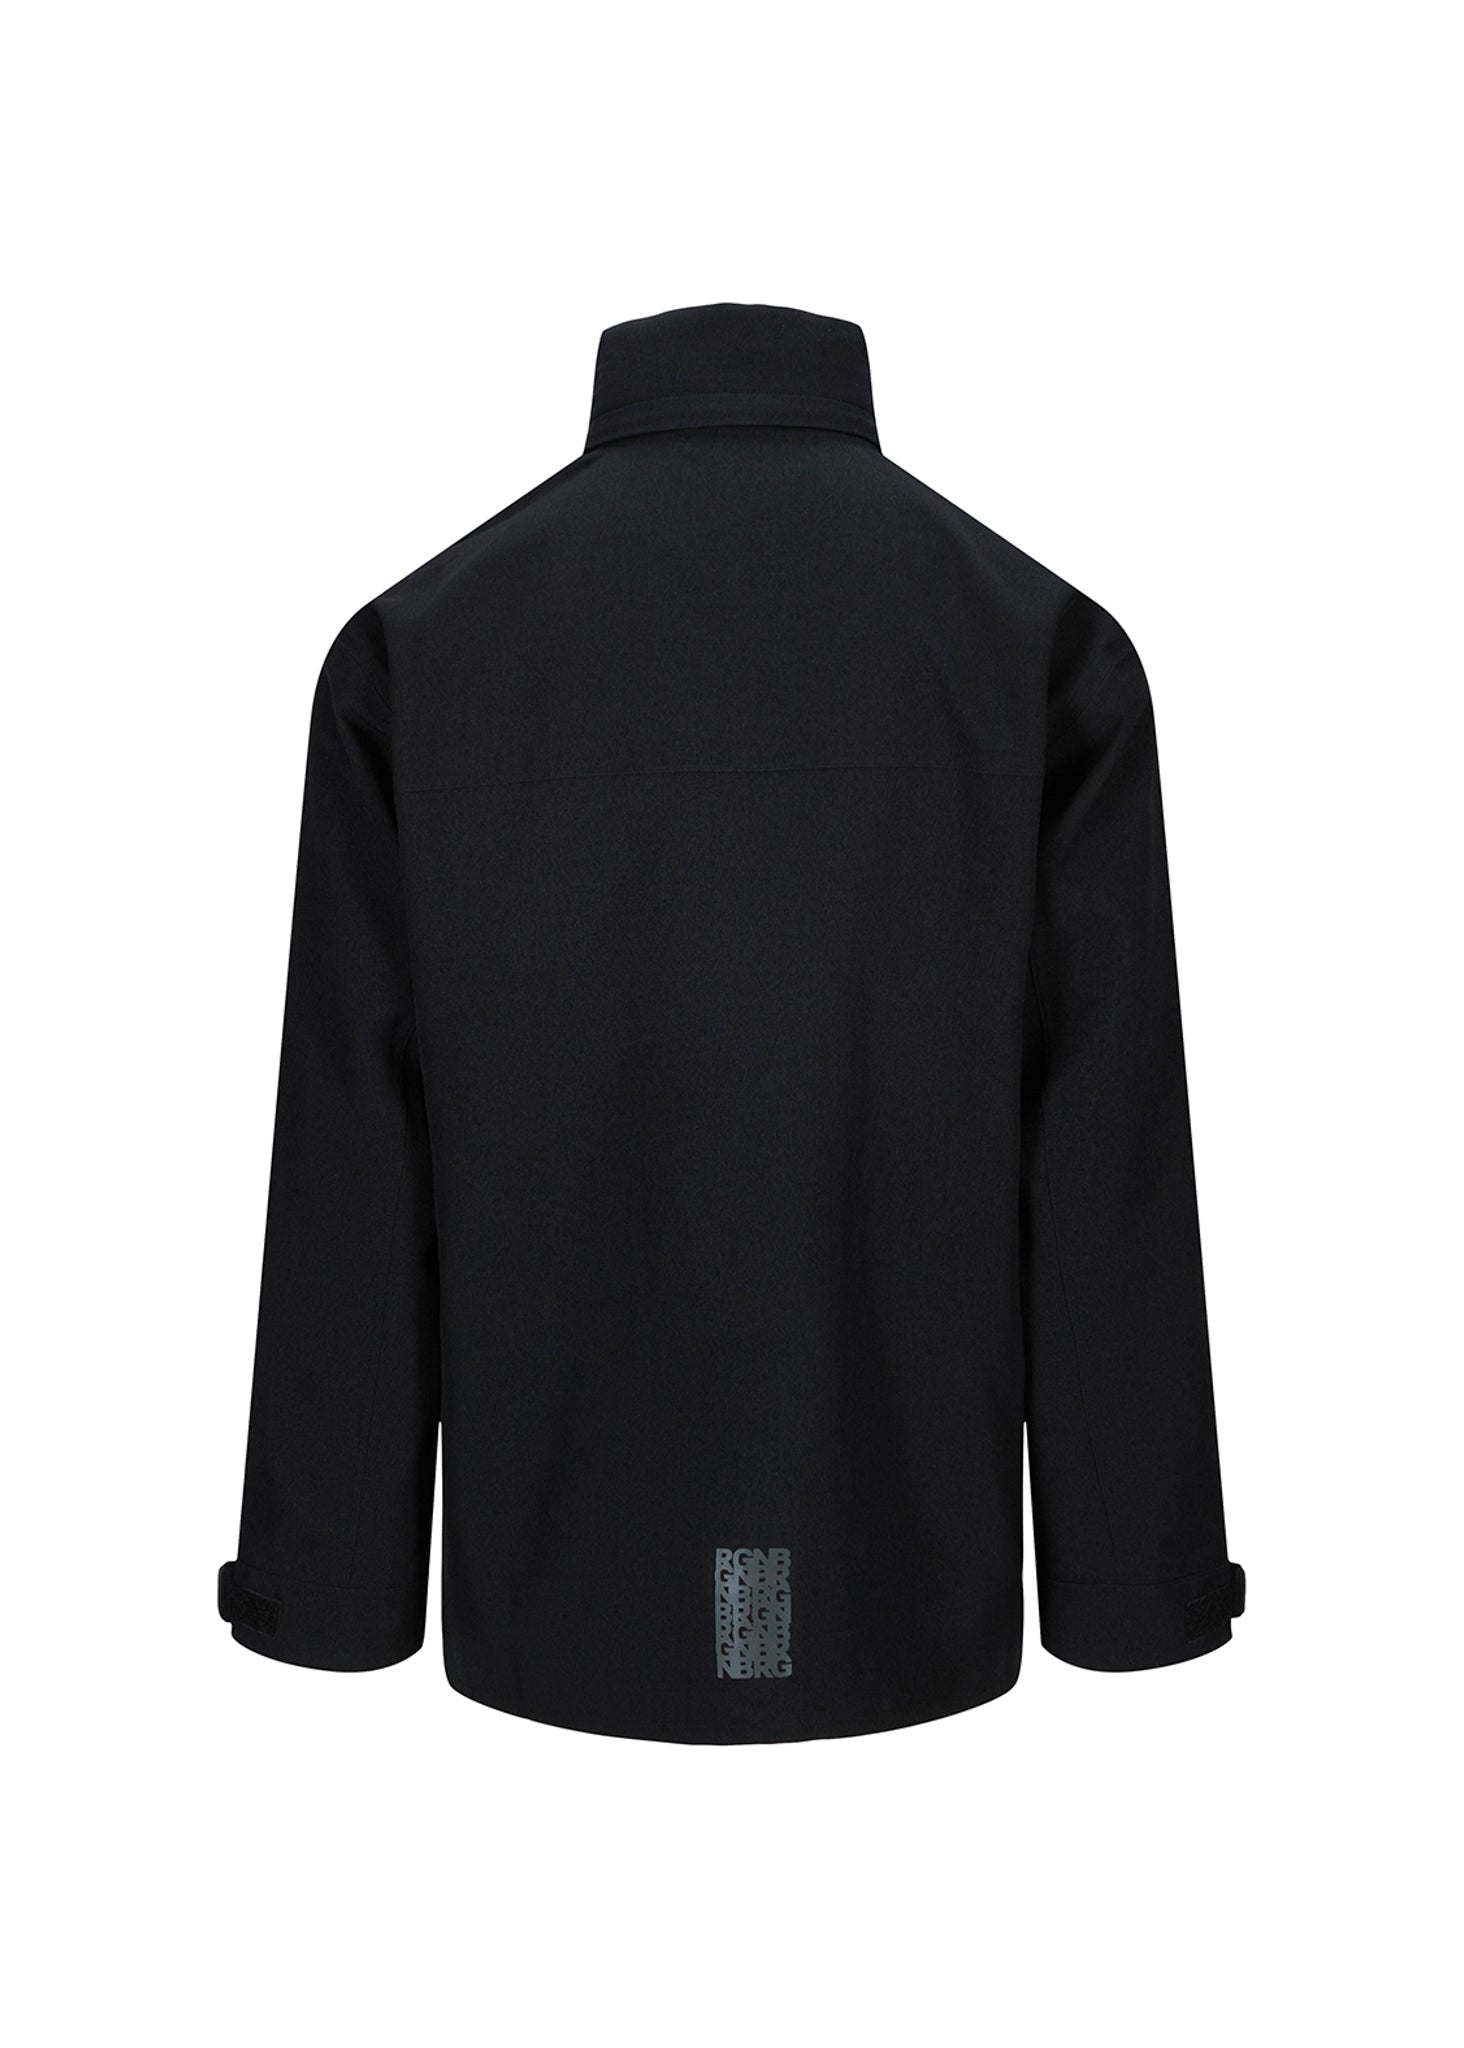 BRGN by Lunde & Gaundal Sip Mens Jacket Coats 095 New Black